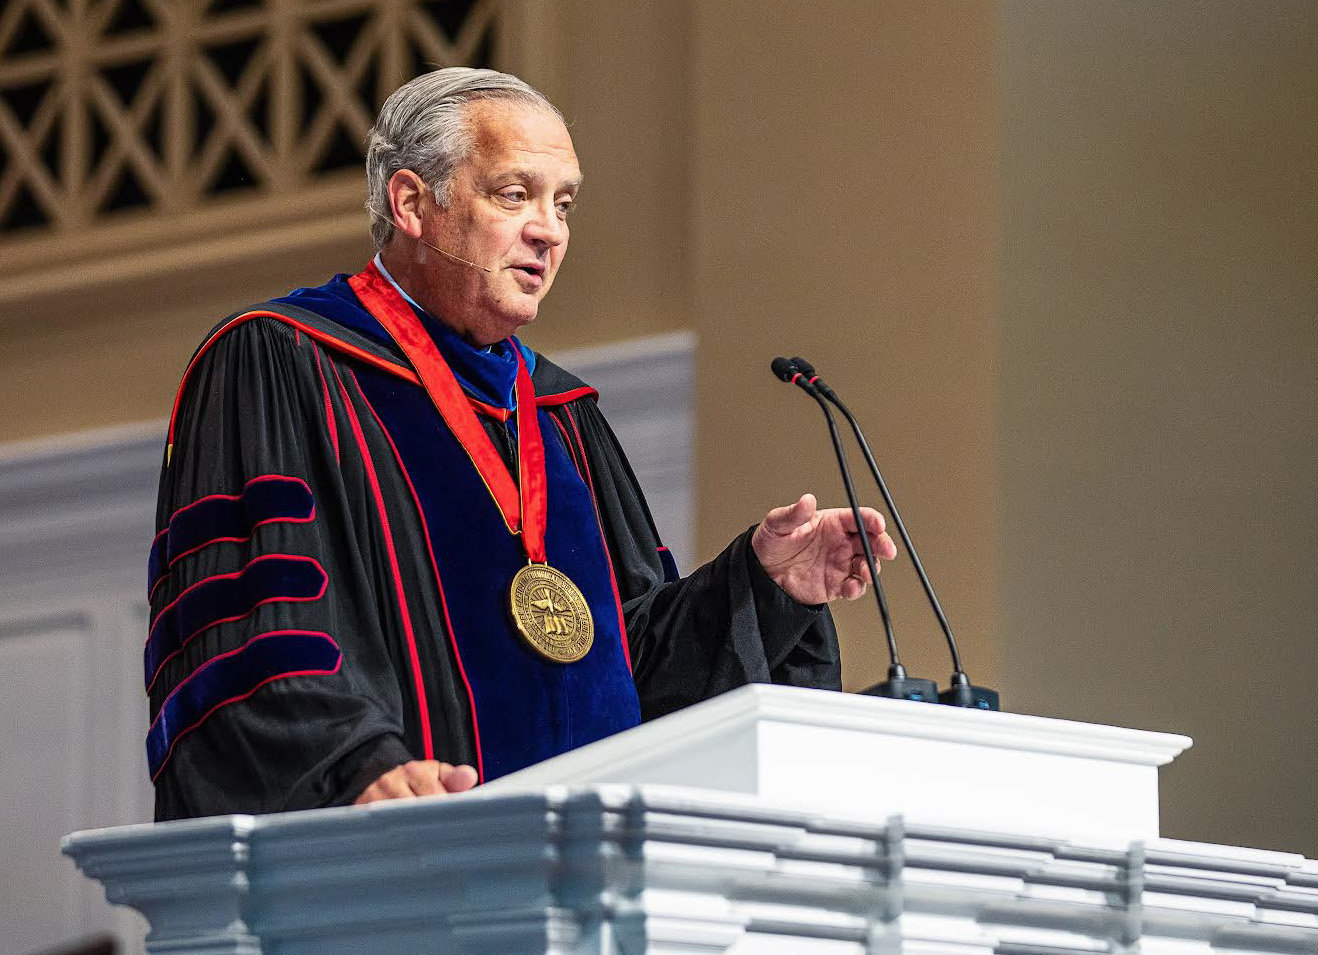 Southern Baptist Theological Seminary President Albert Mohler delivers the annual spring convocation address. (Photo/Southern Baptist Theological Seminary)